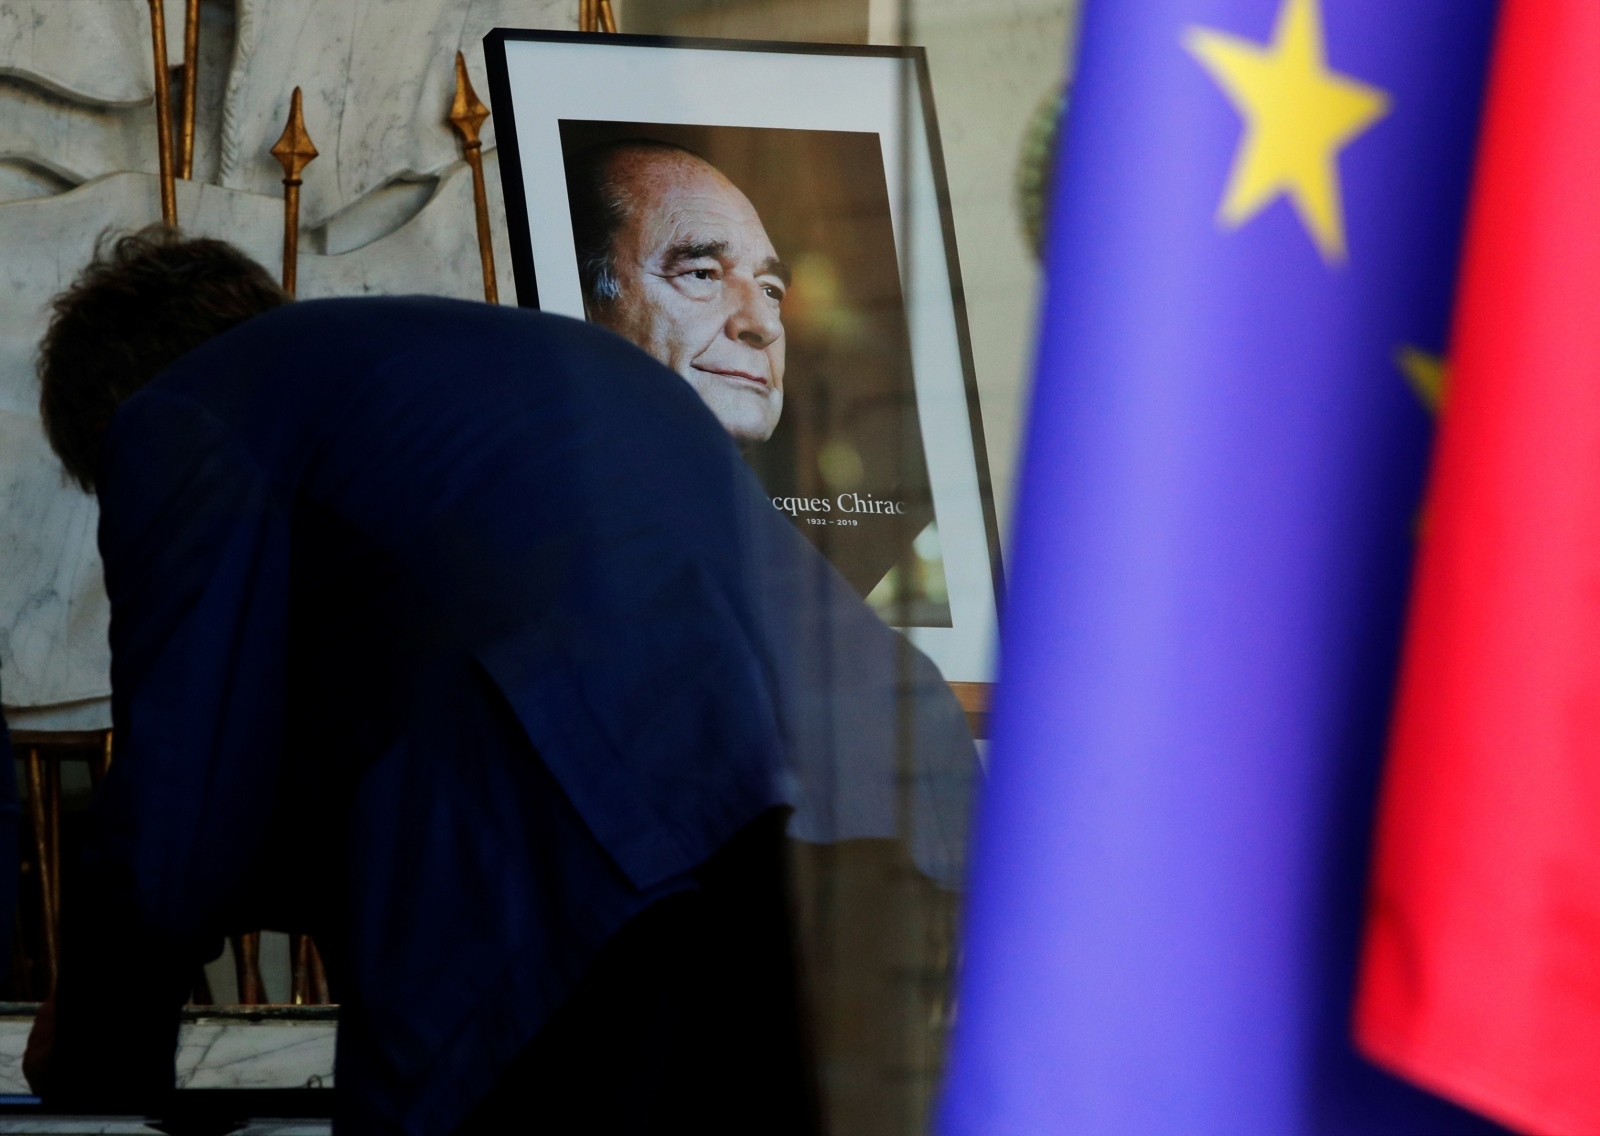 A person signs the book of condolences to pay tribute to late former French President Jacques Chirac at the Elysee Palace in Paris A person signs the book of condolences to pay tribute to late former French President Jacques Chirac at the Elysee Palace in Paris, France, September 27, 2019. REUTERS/Philippe Wojazer PHILIPPE WOJAZER